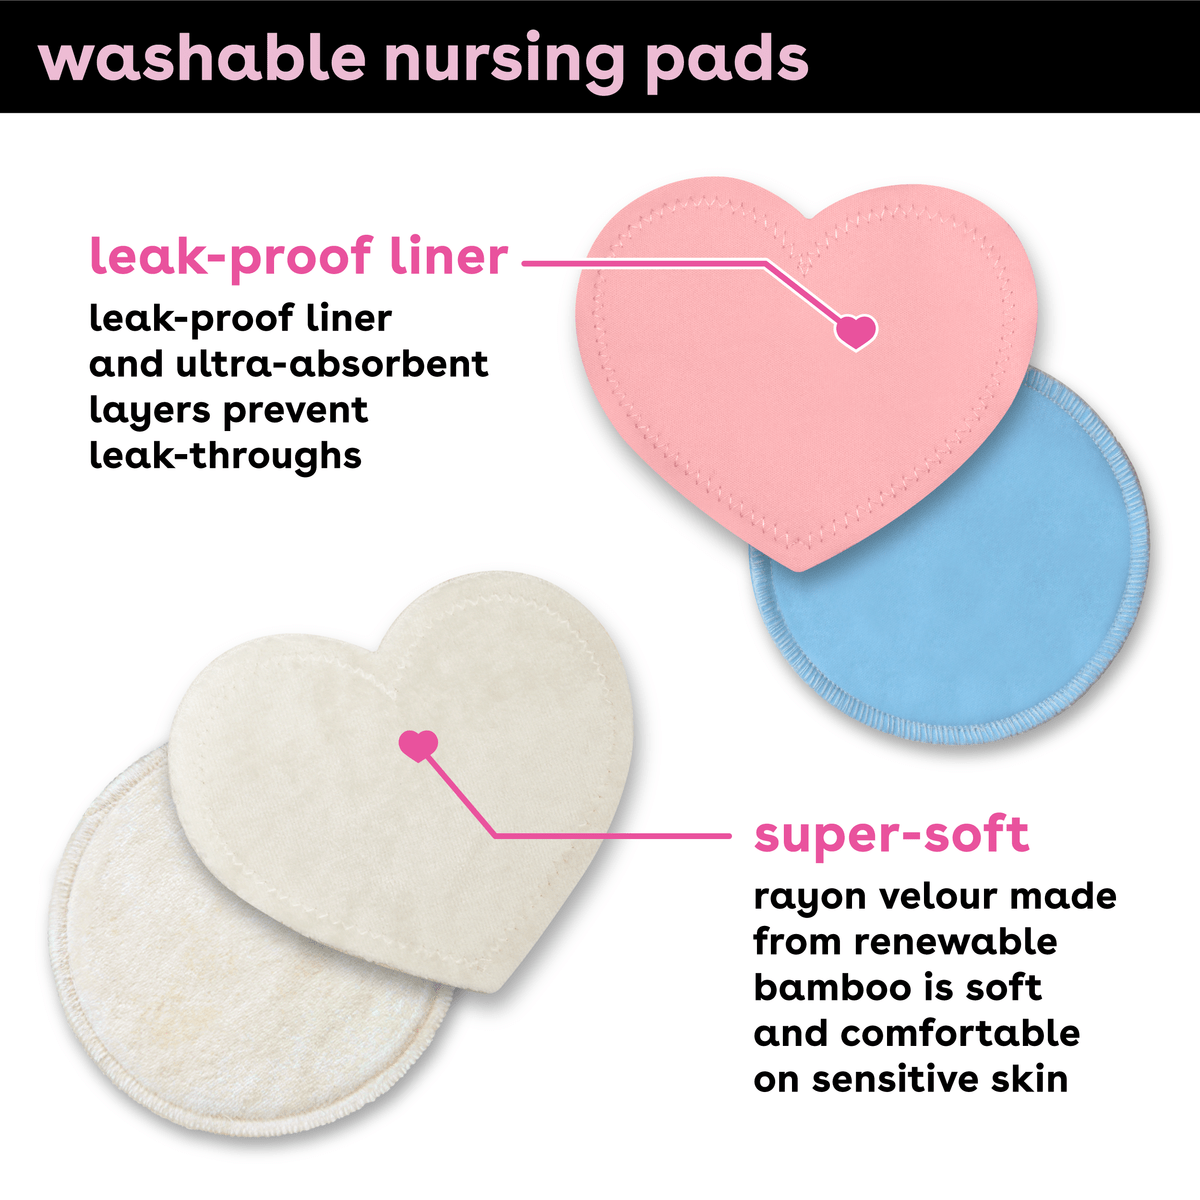 Bamboobies Disposable Nursing Pads for Breastfeeding & Sensitive Skin,  Super-Absorbent Milk Proof Pads, Perfect Baby Shower Gifts, 60 Count